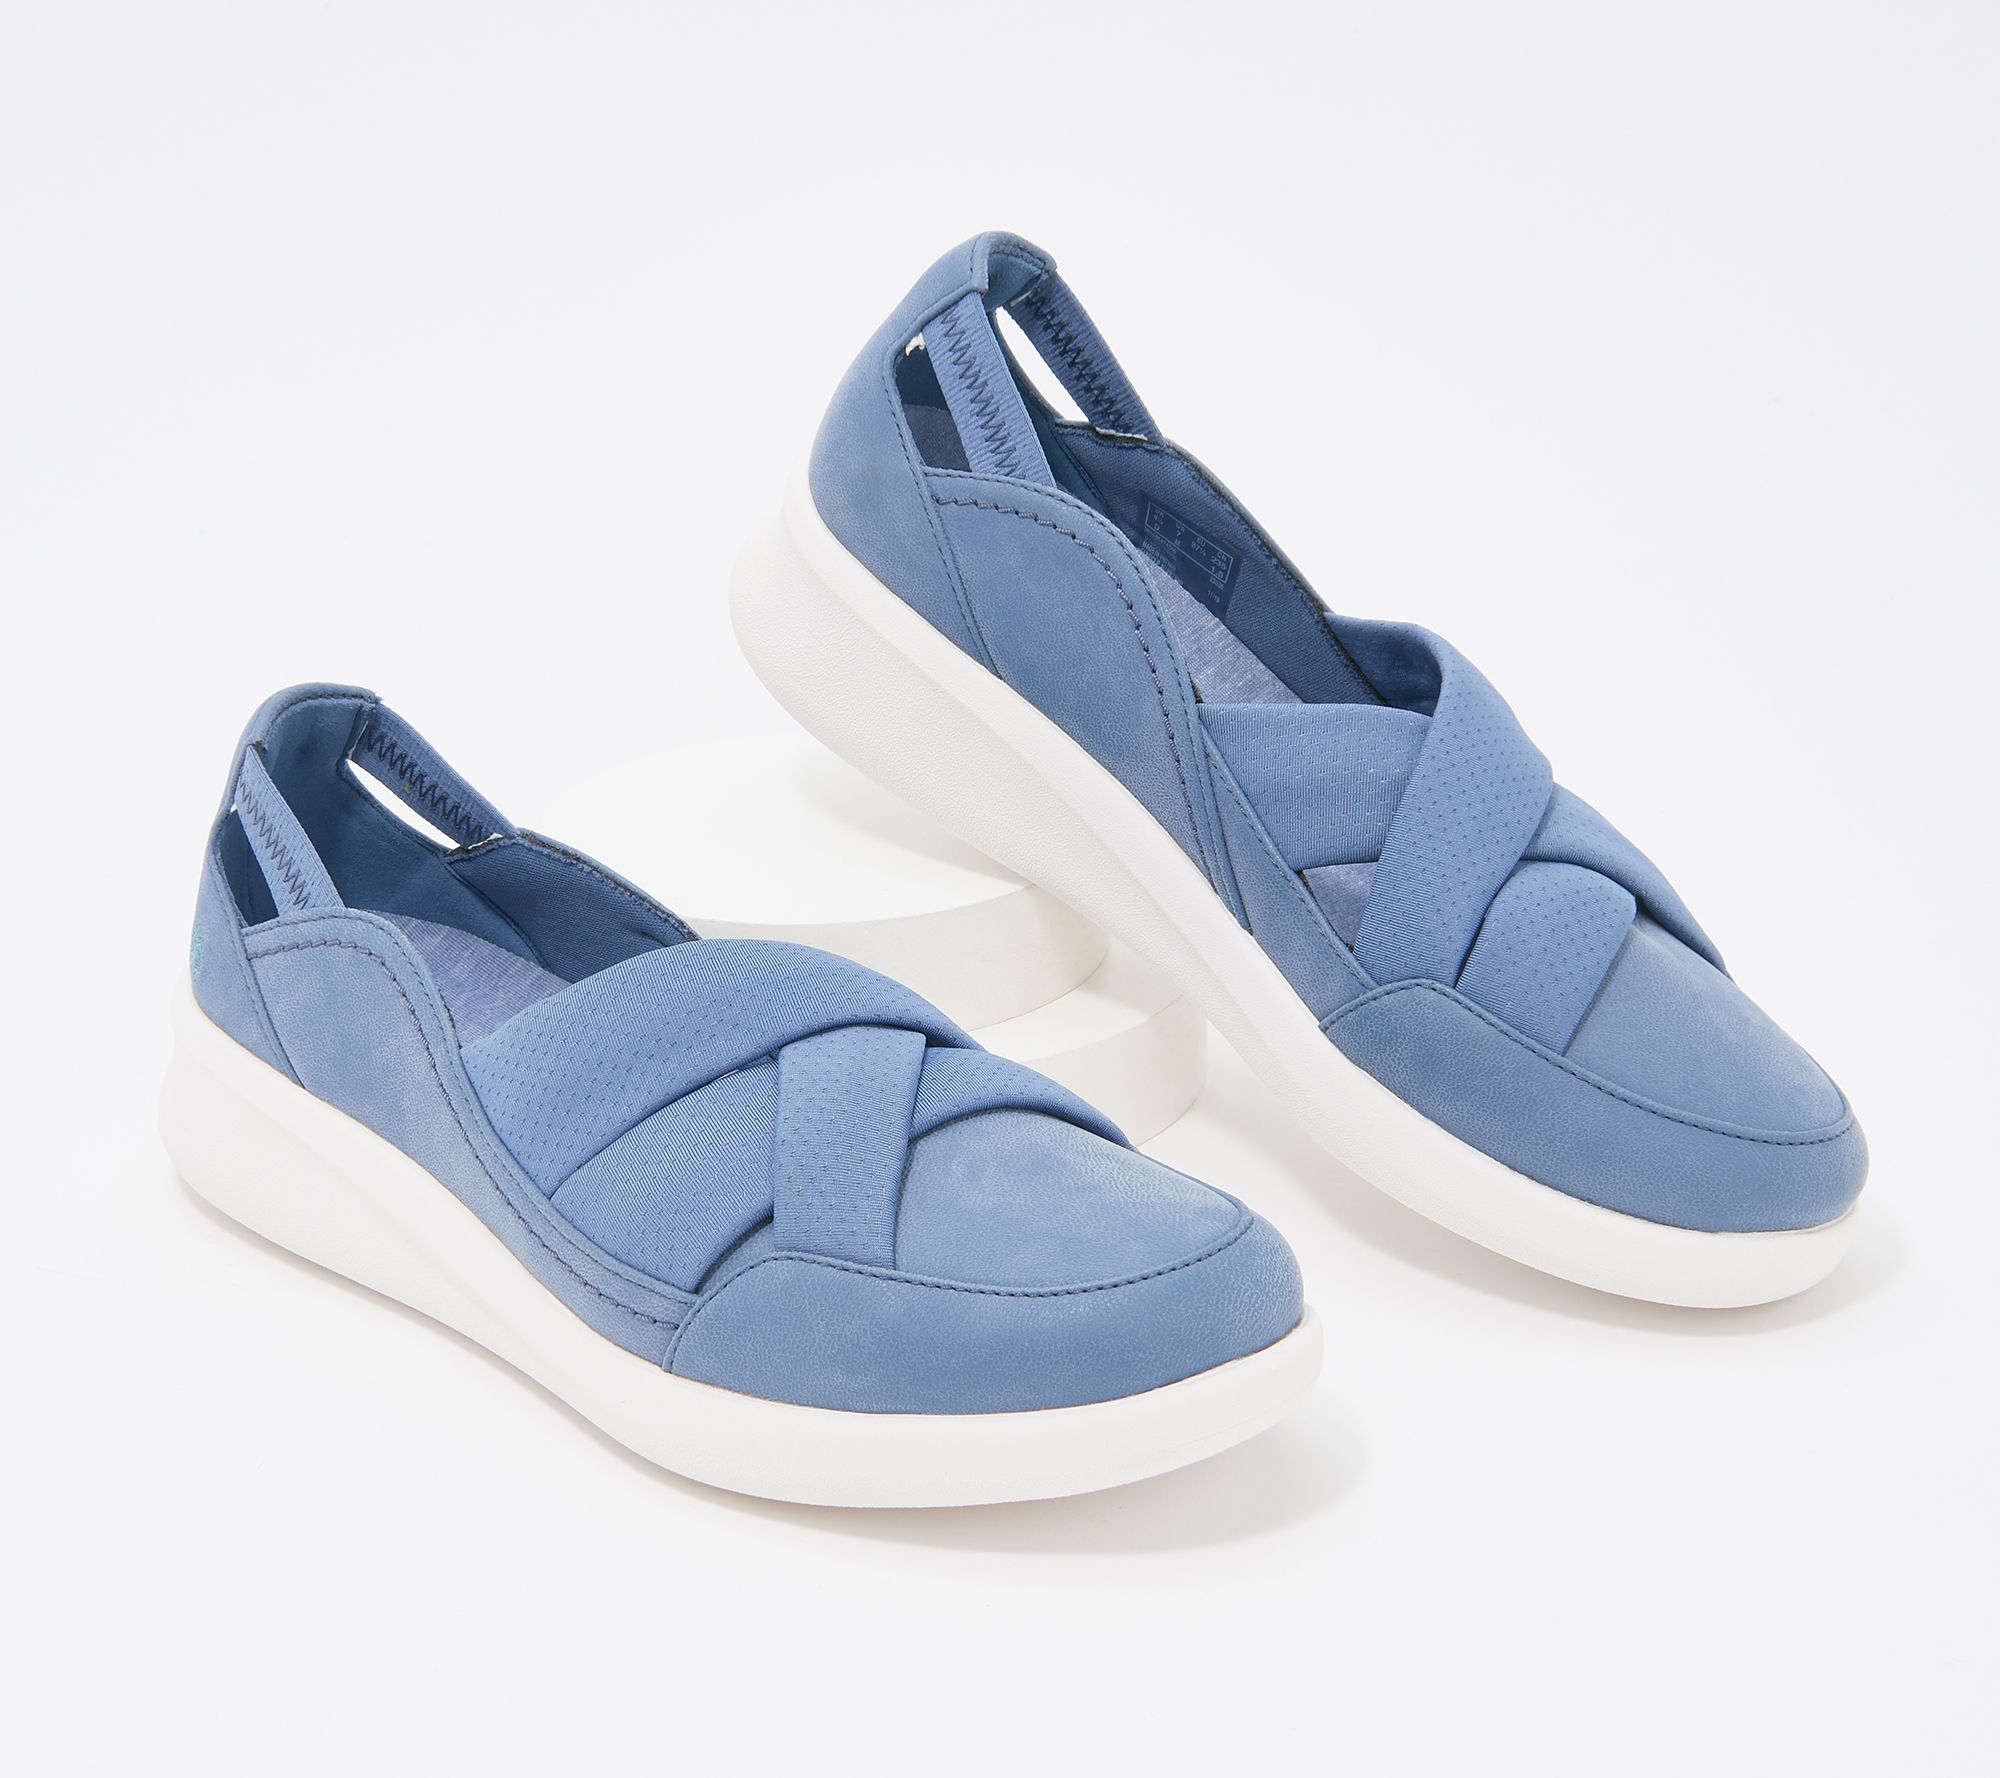 cloudsteppers by clarks qvc